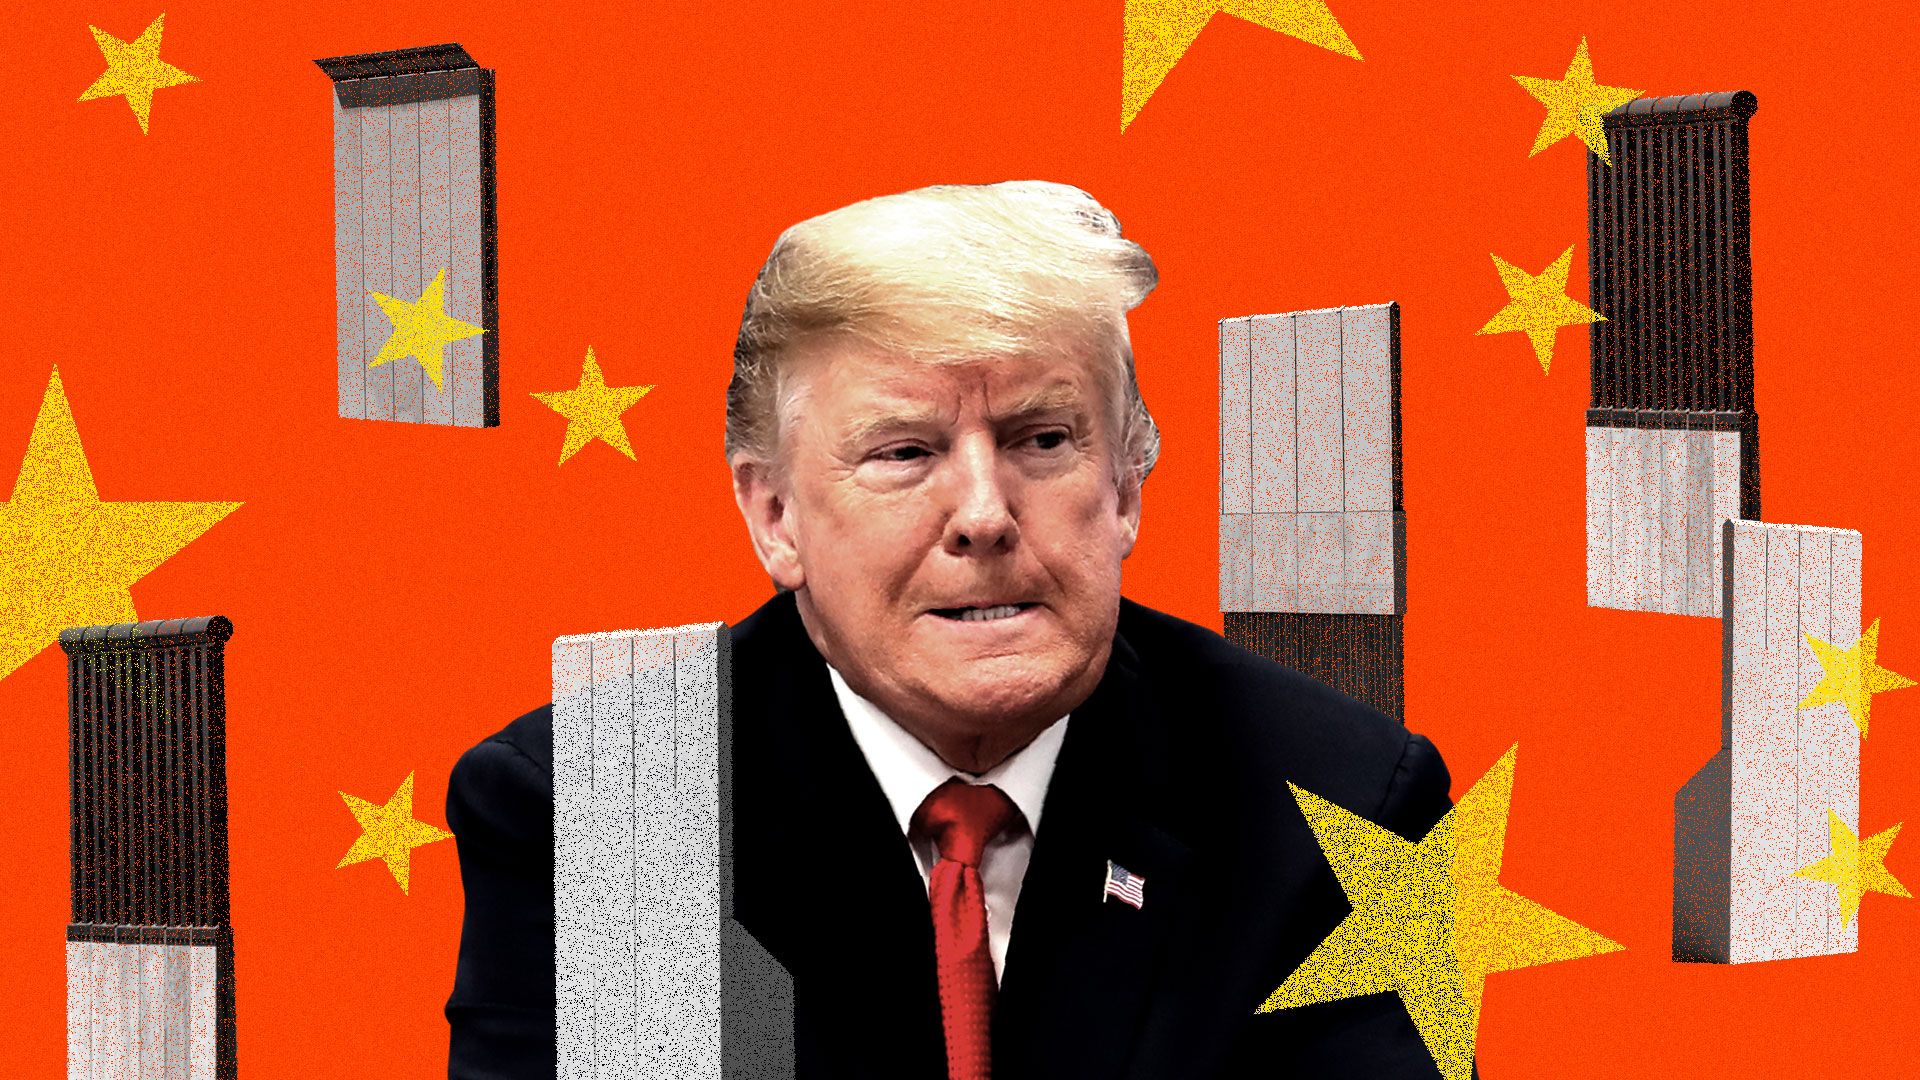 Donald Trump surrounded by wall prototypes and Chinese stars